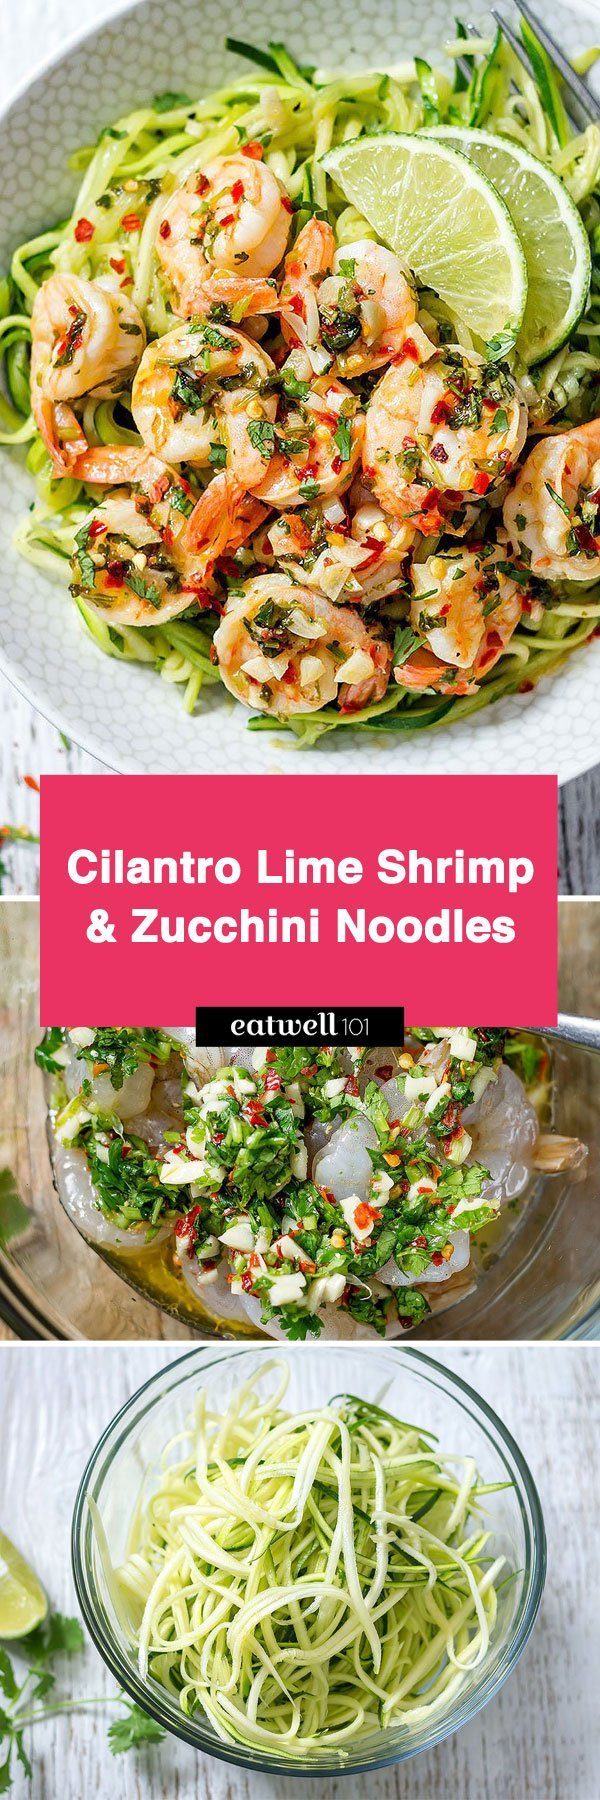 Cilantro Lime Shrimp with Zucchini Noodles - #lowcarb #keto #recipe #eatwell101 - A perfect low-carb option when you're looking for a quick healthy dinner that's packed with flavor.